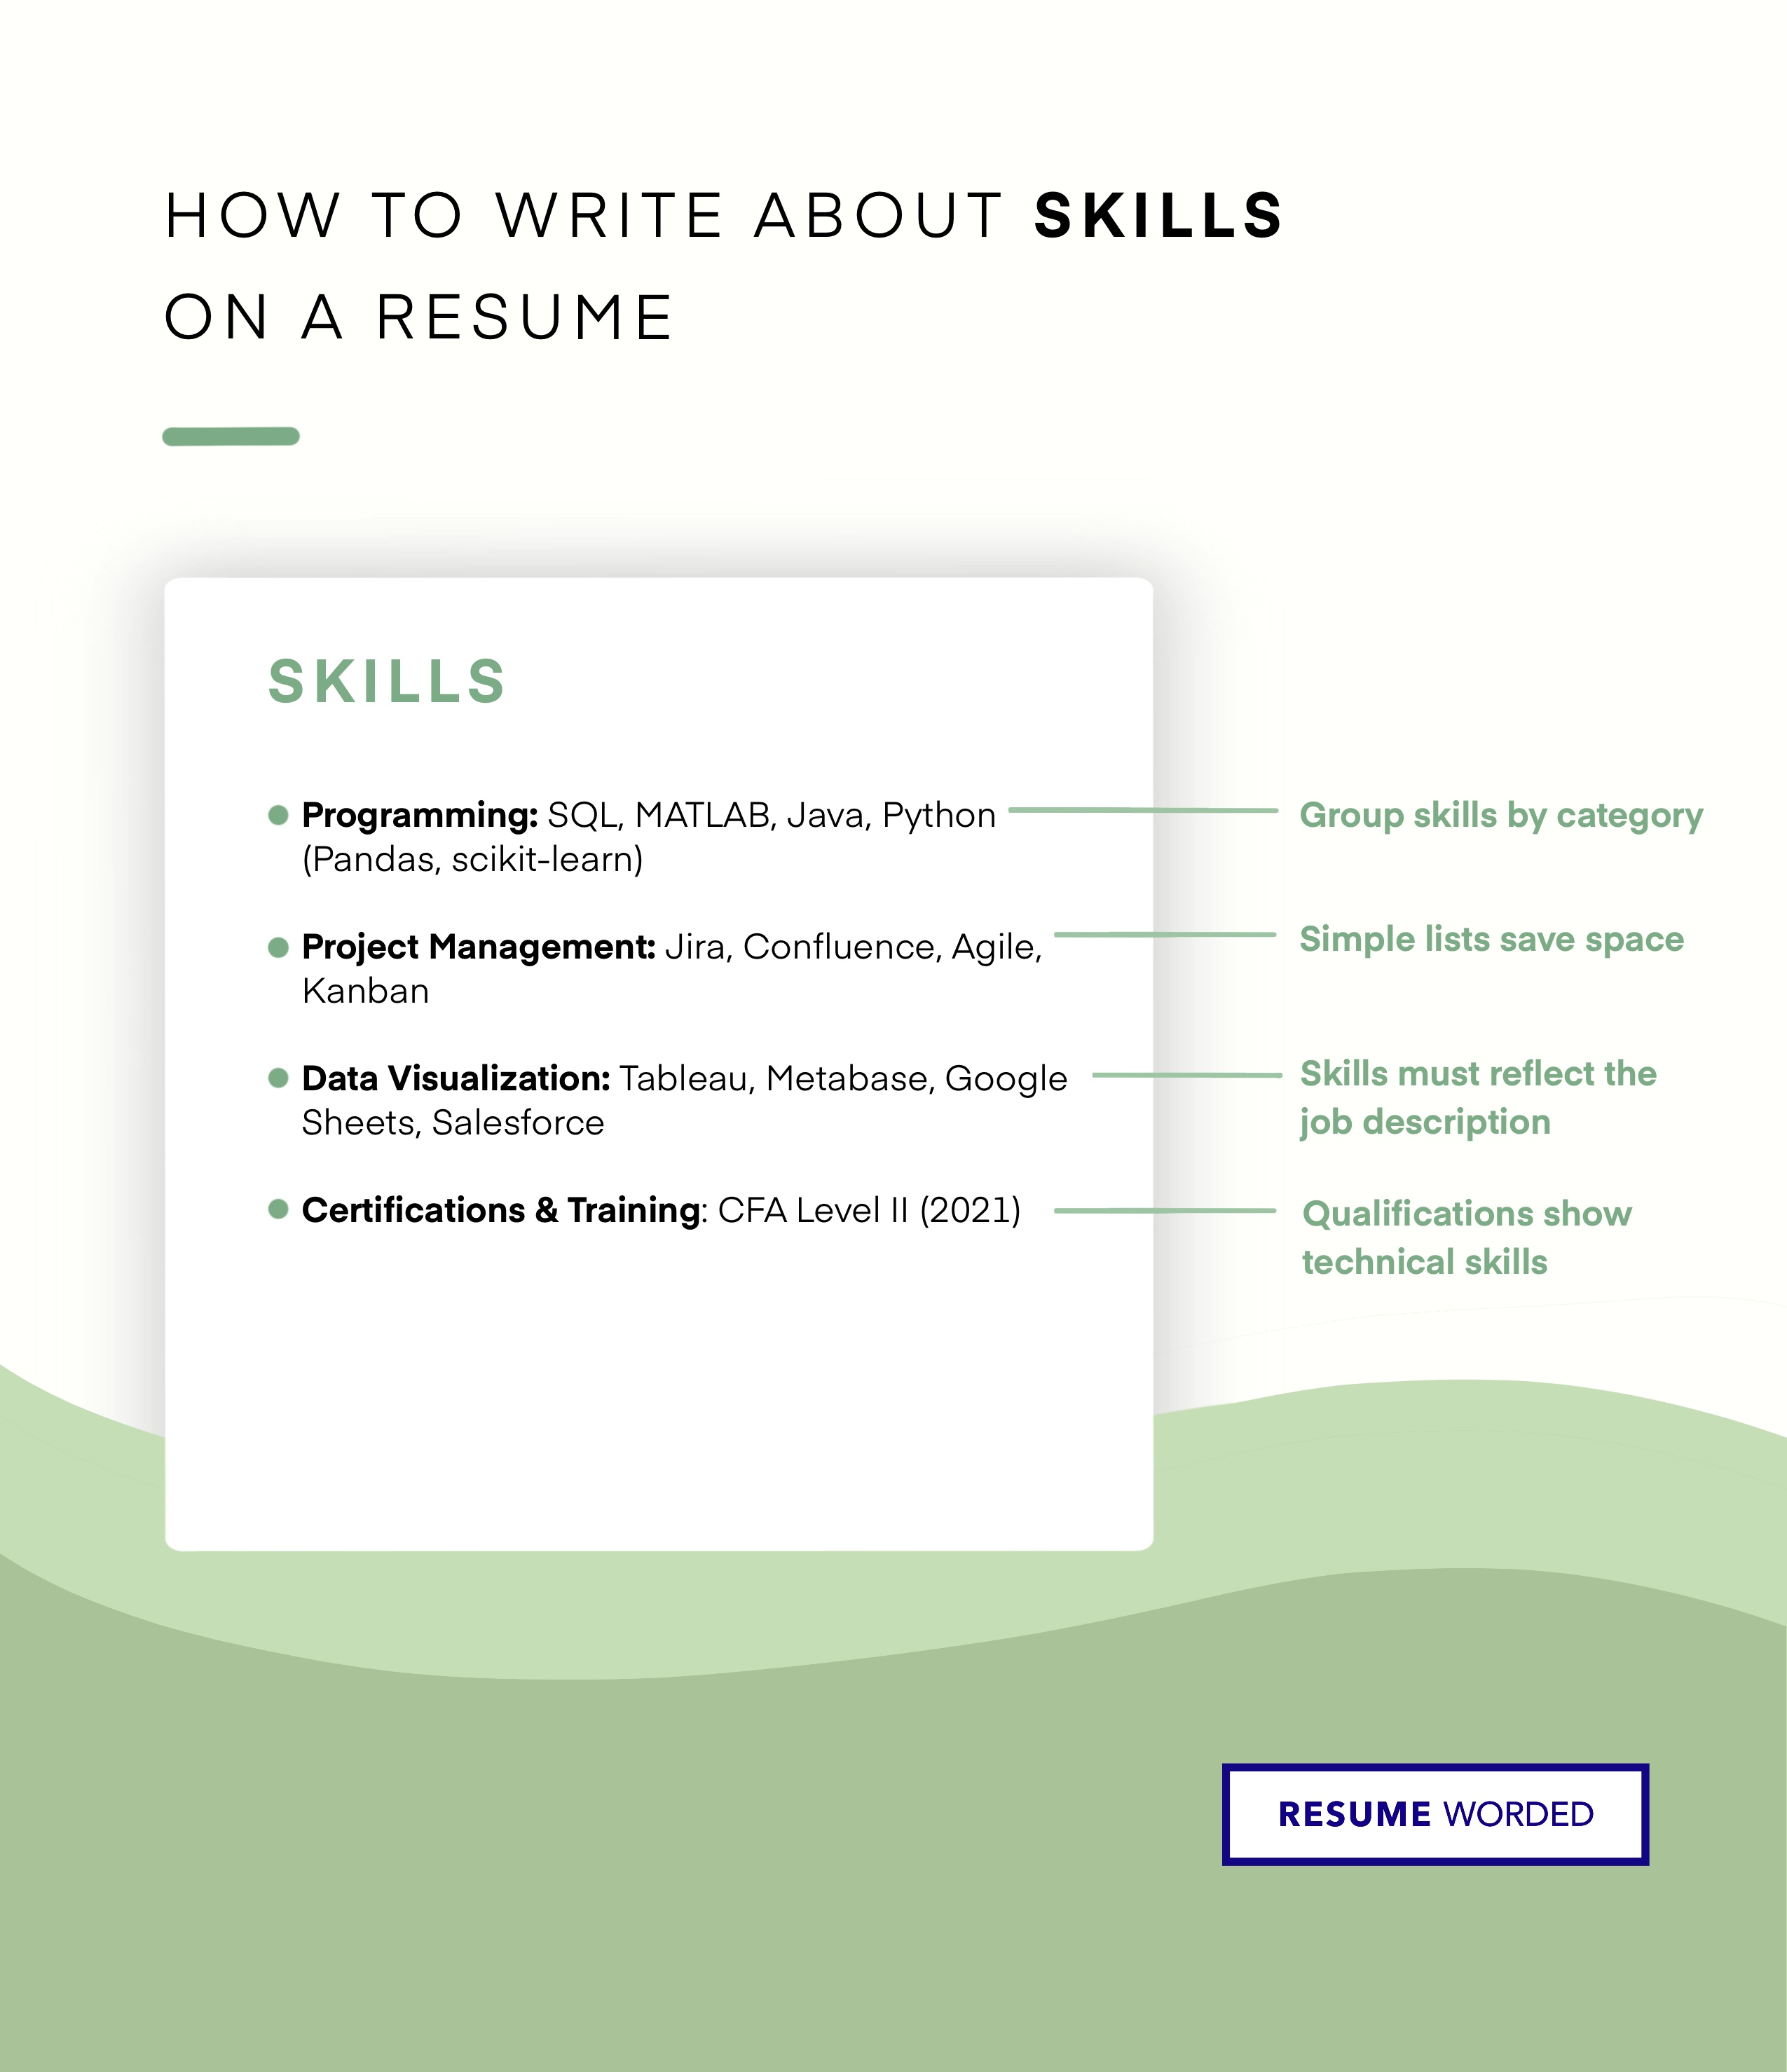 An infographic showing how to write a skills section